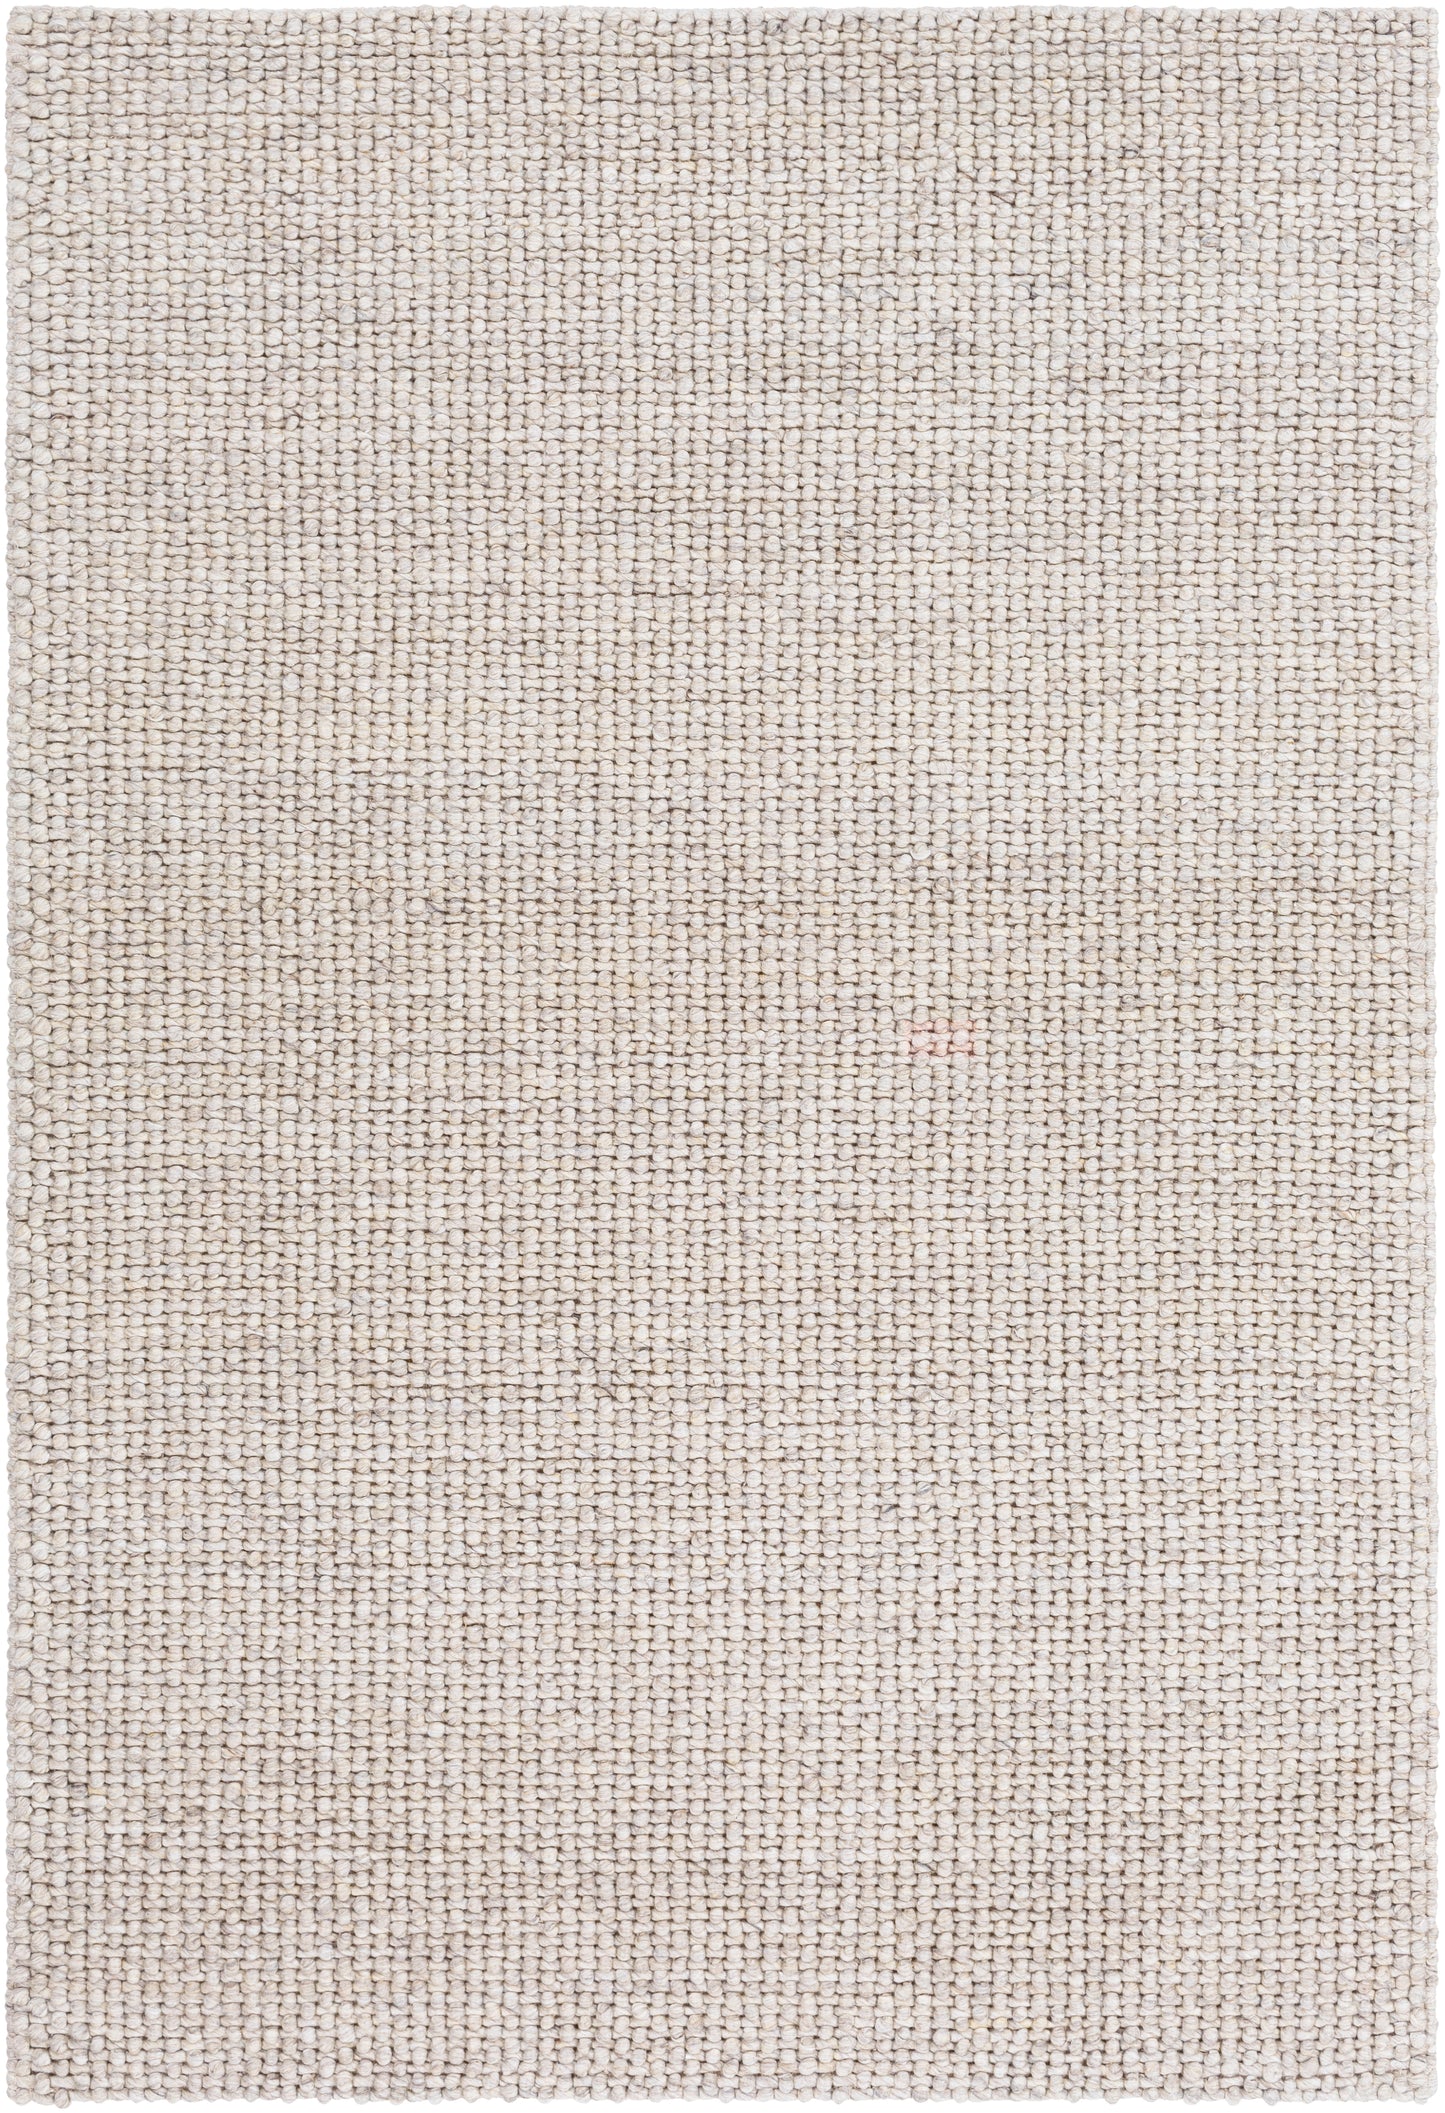 Lucerne 23367 Hand Woven Wool Indoor Area Rug by Surya Rugs